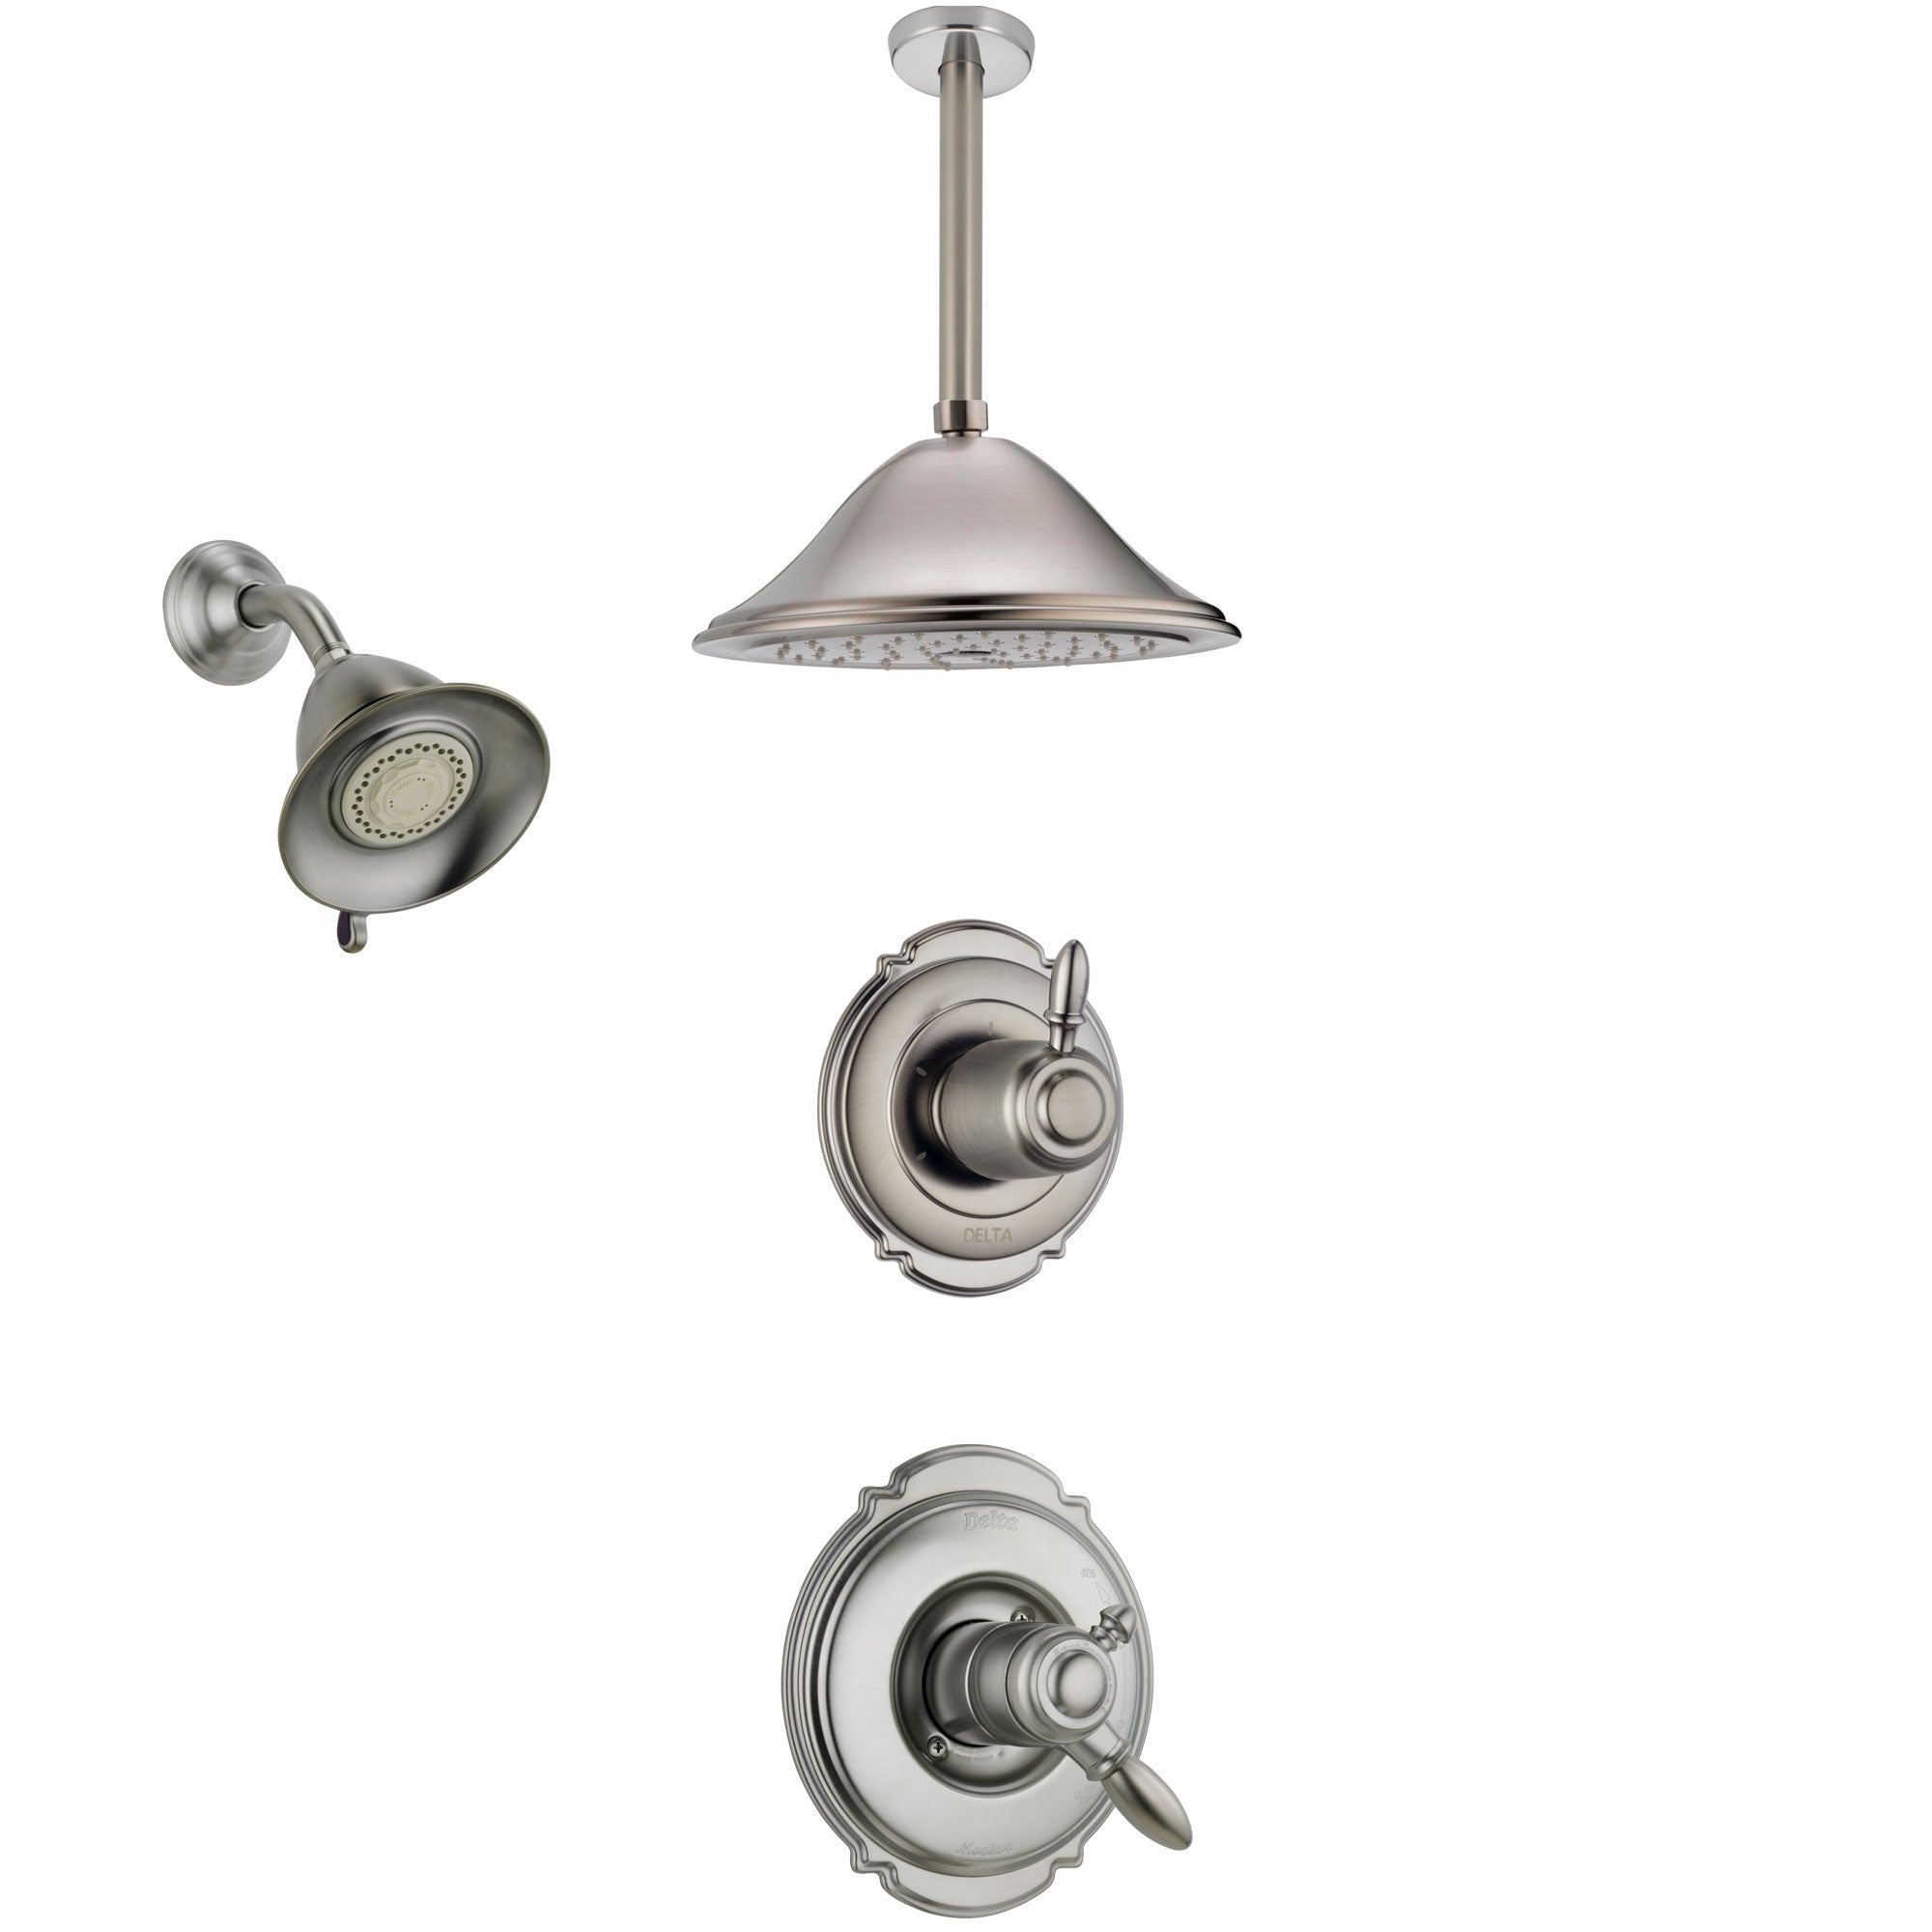 Delta Victorian Stainless Steel Finish Shower System with Dual Control Handle, Diverter, Showerhead, and Ceiling Mount Showerhead SS172551SS5